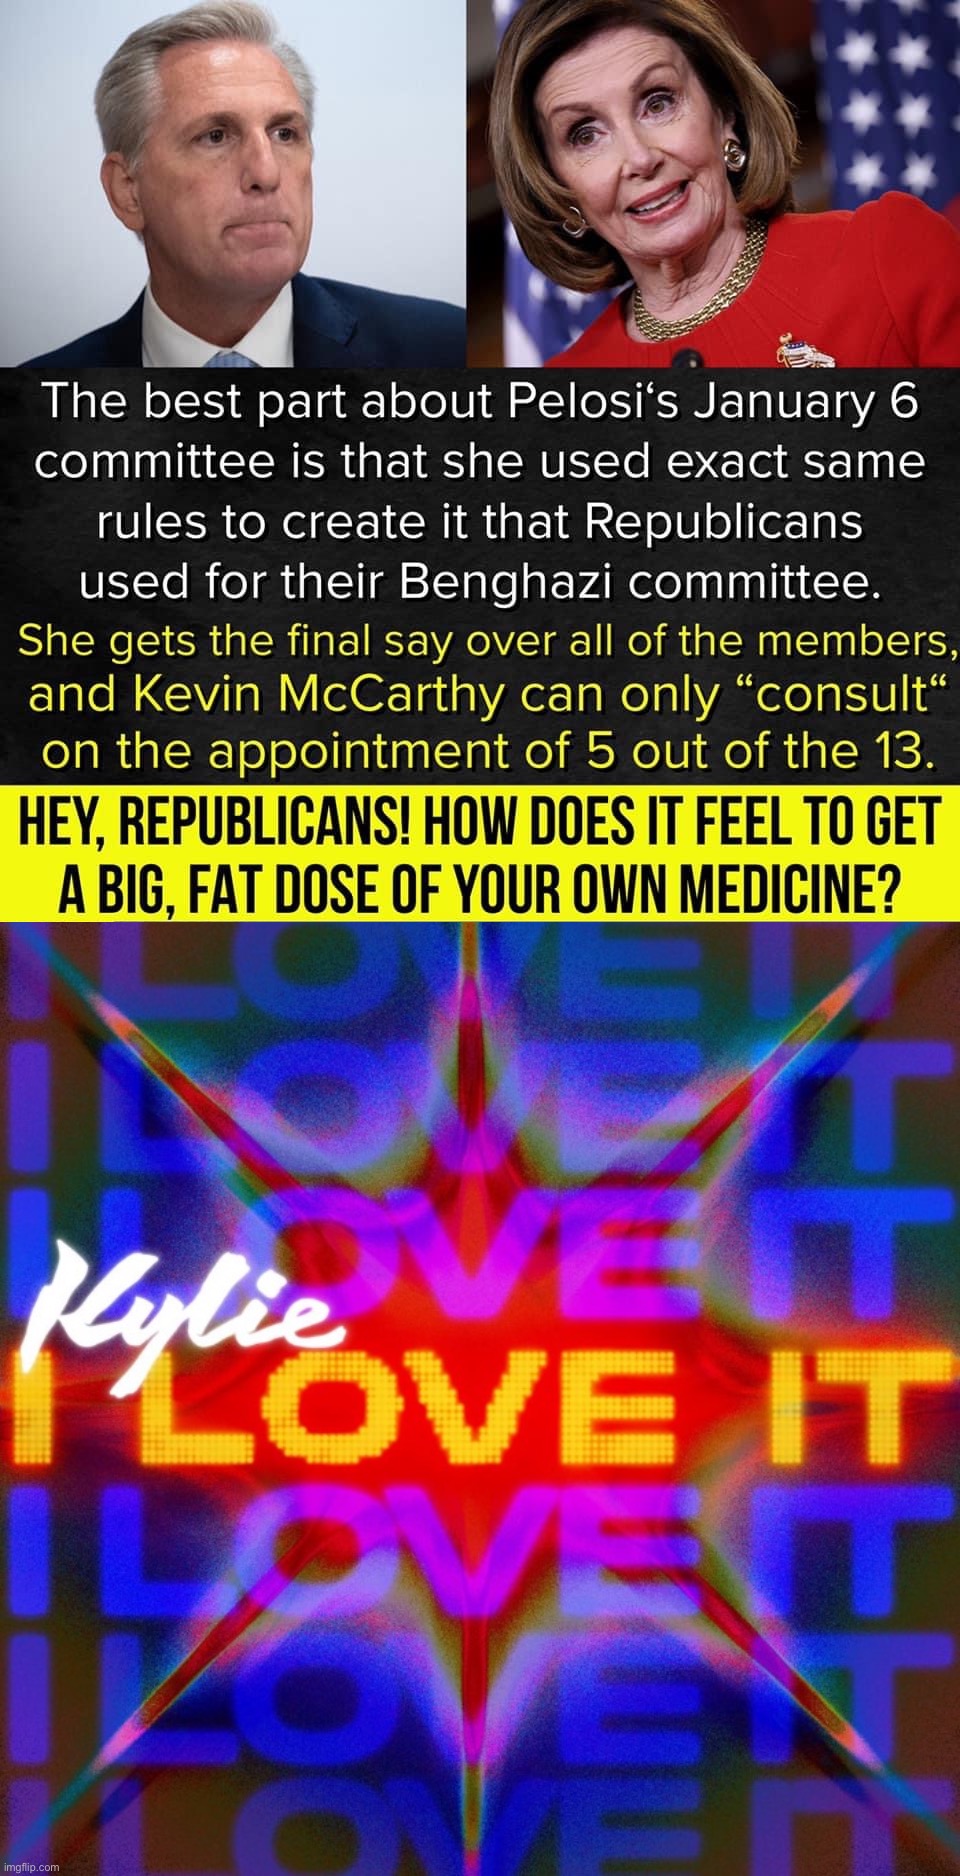 This is quite fantastic | image tagged in pelosi jan 6,kylie i love it,i love it,nancy pelosi,january 6,capitol hill riot | made w/ Imgflip meme maker